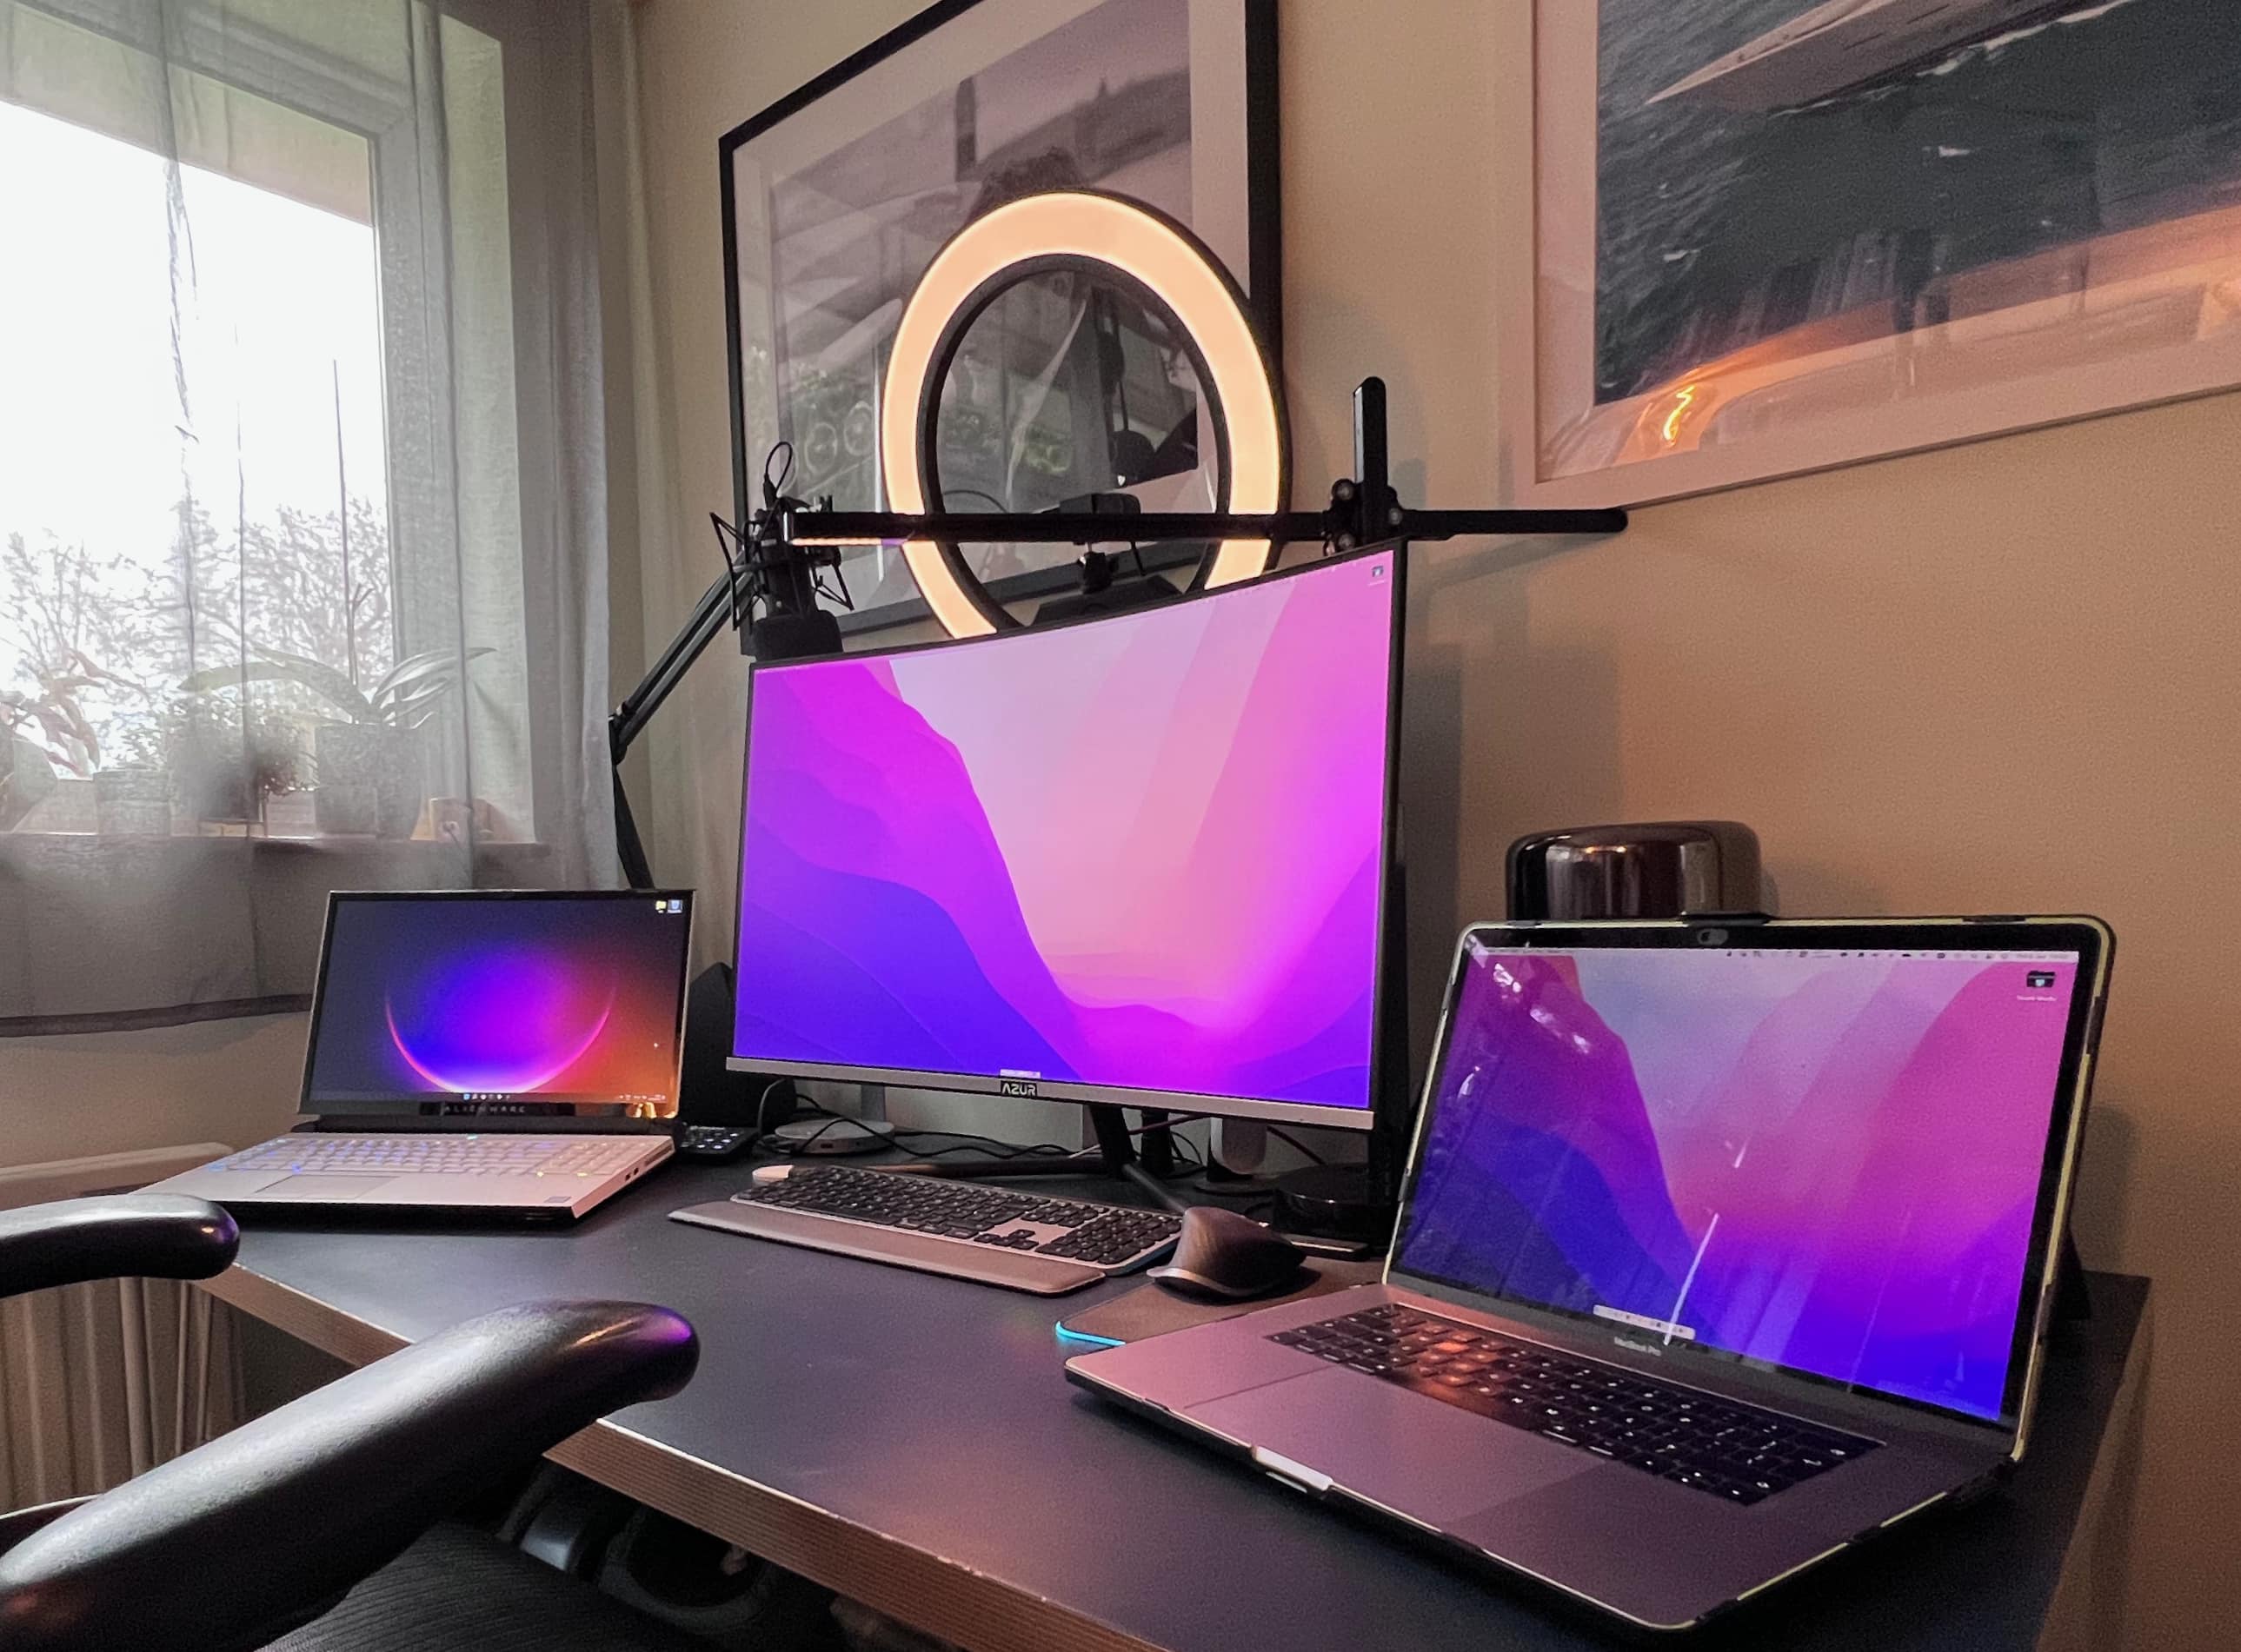 In this view you see both the Alienware laptop and the frustrating MacBook Pro. 